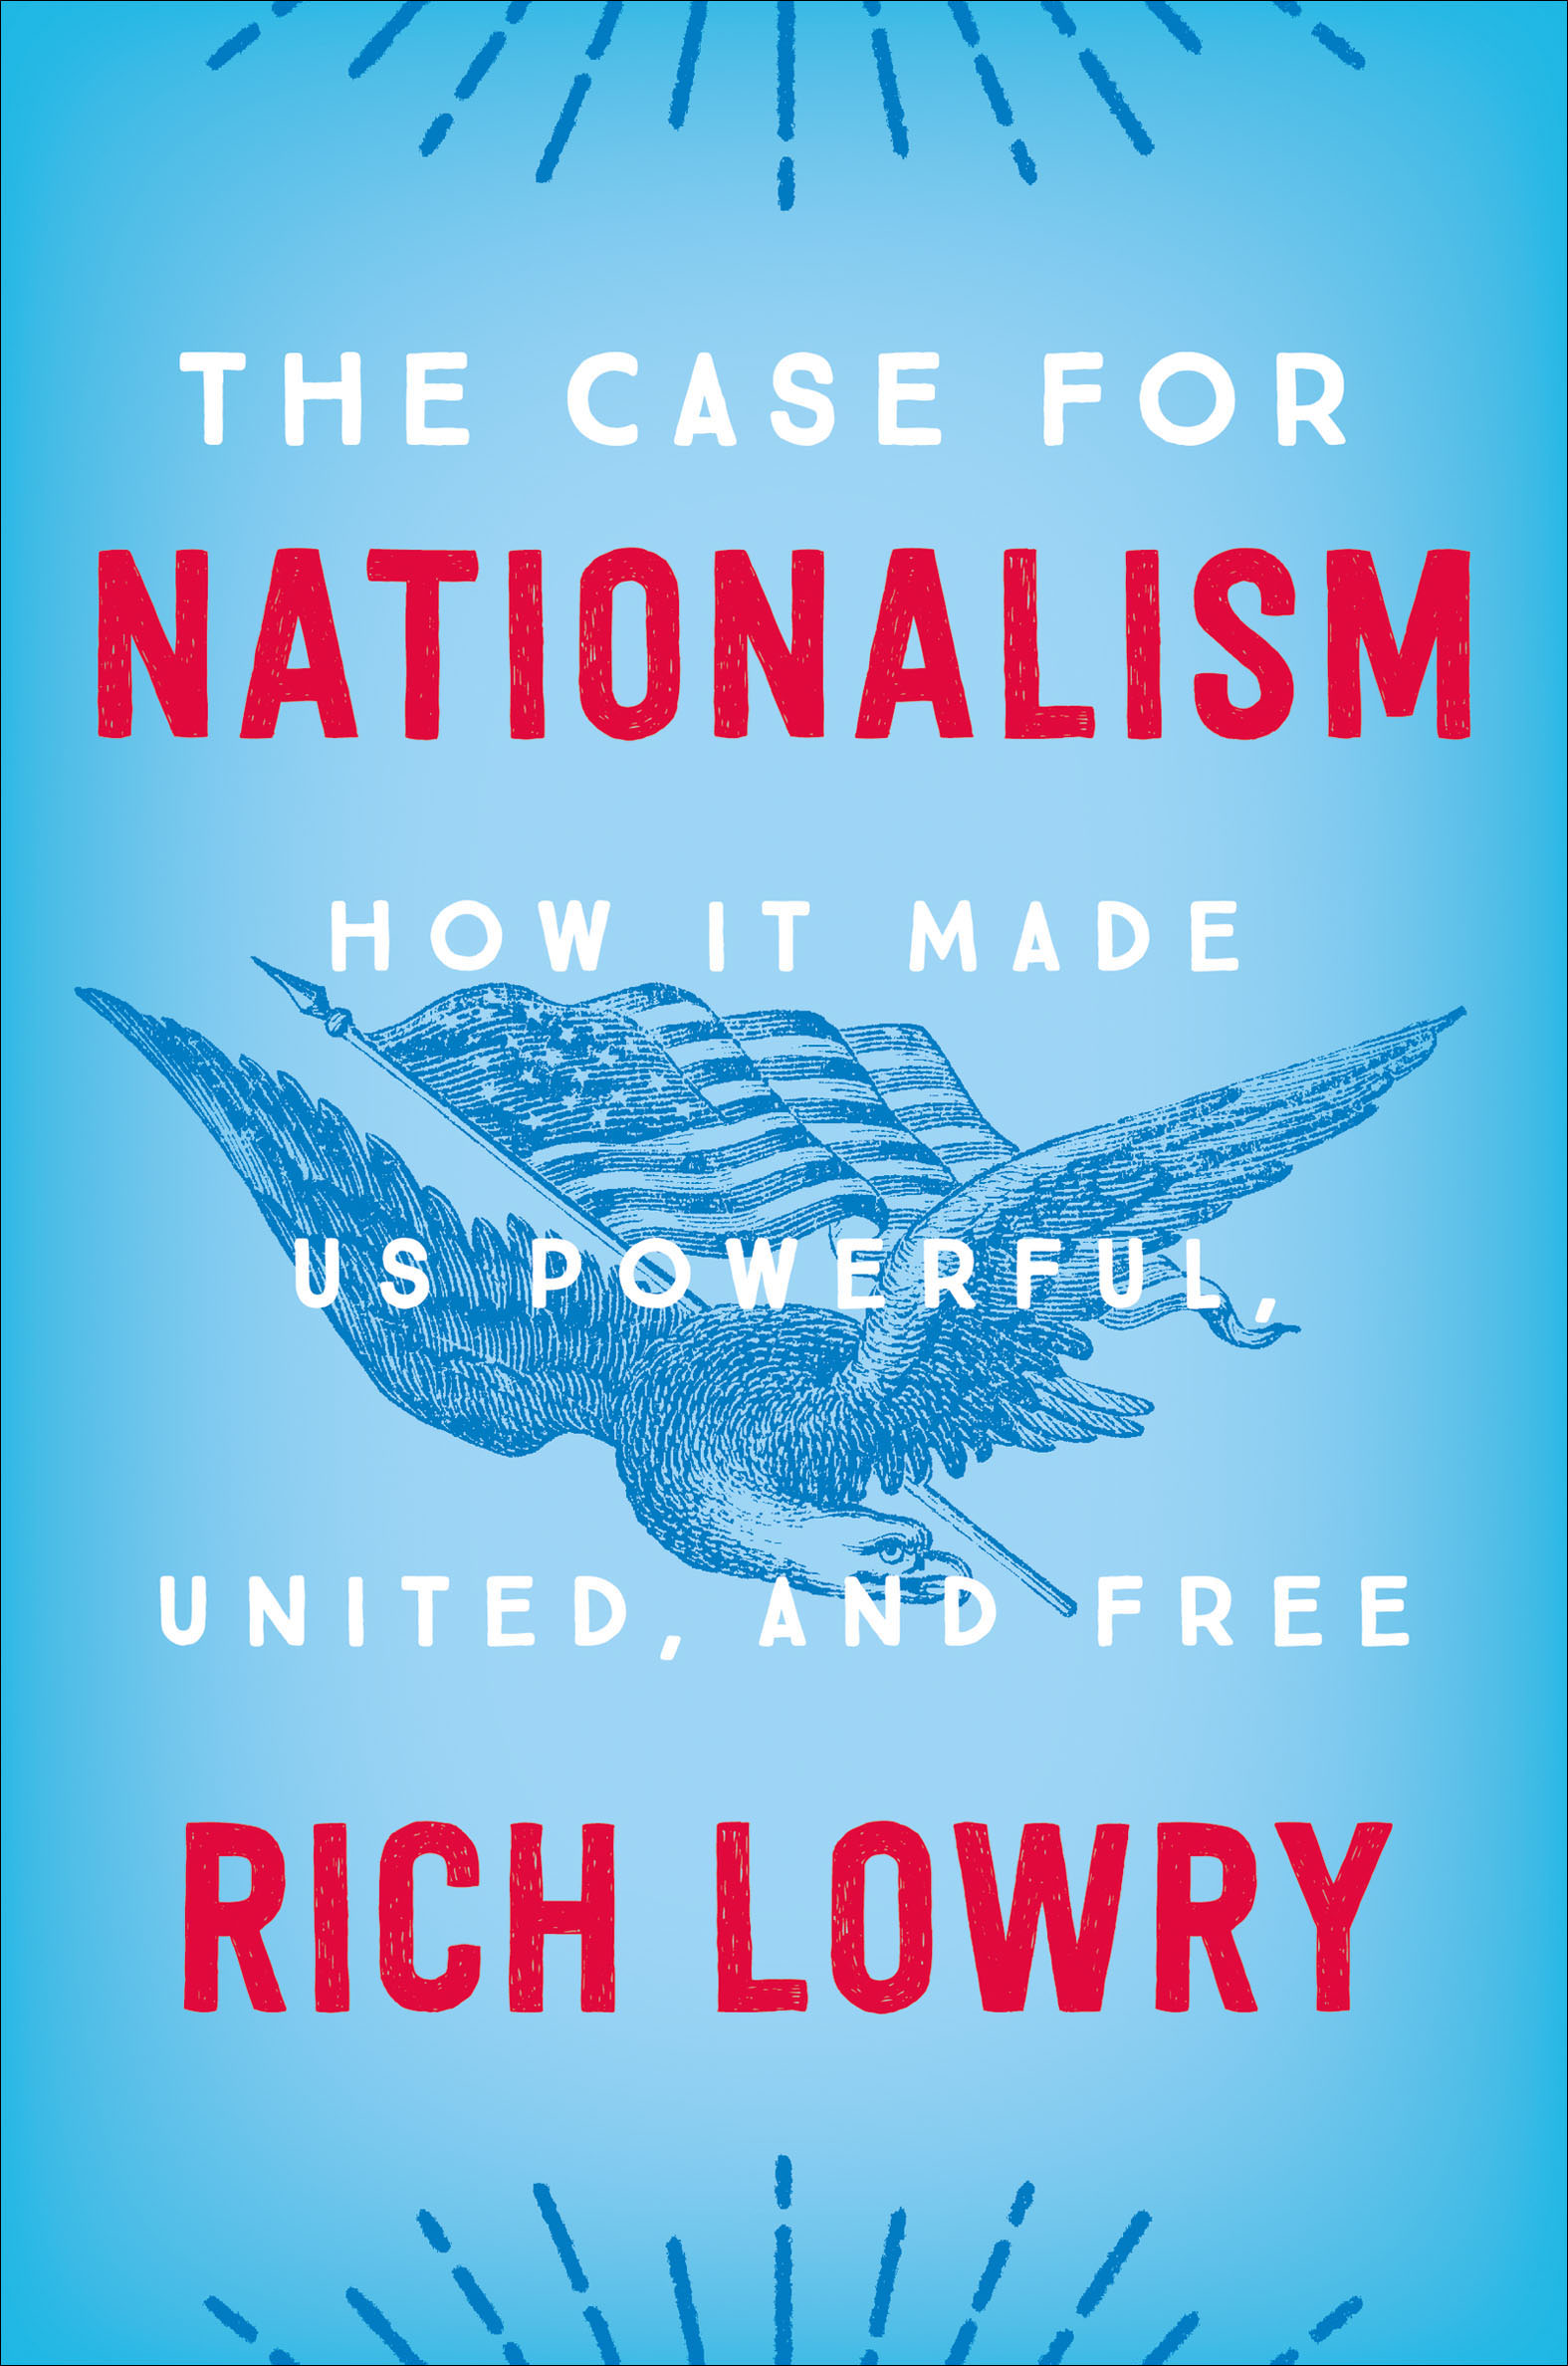 The case for nationalism how it made us powerful, united, and free cover image